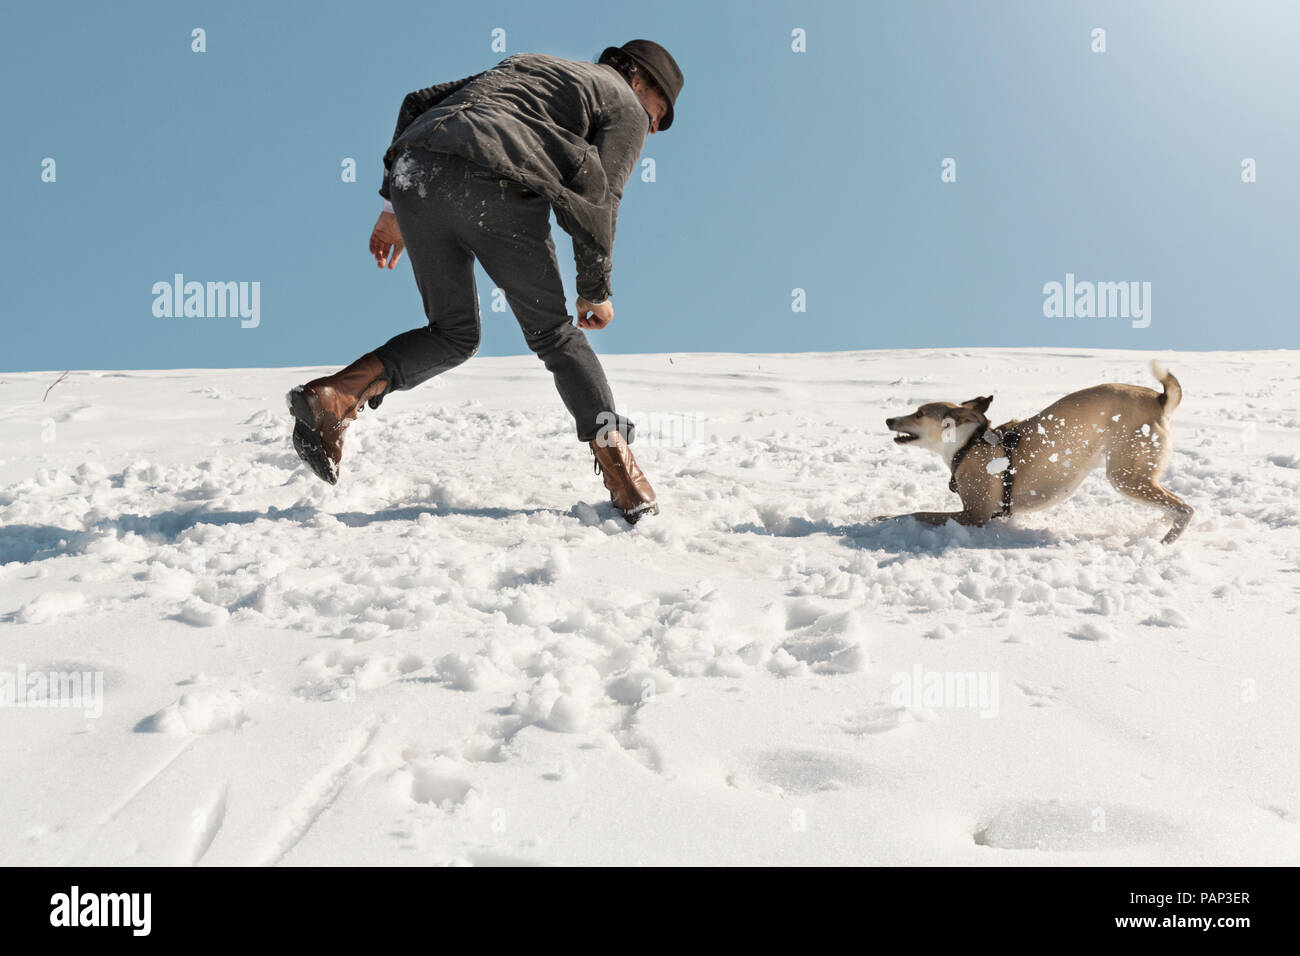 Man Playing with dog in winter, throwing snow Banque D'Images